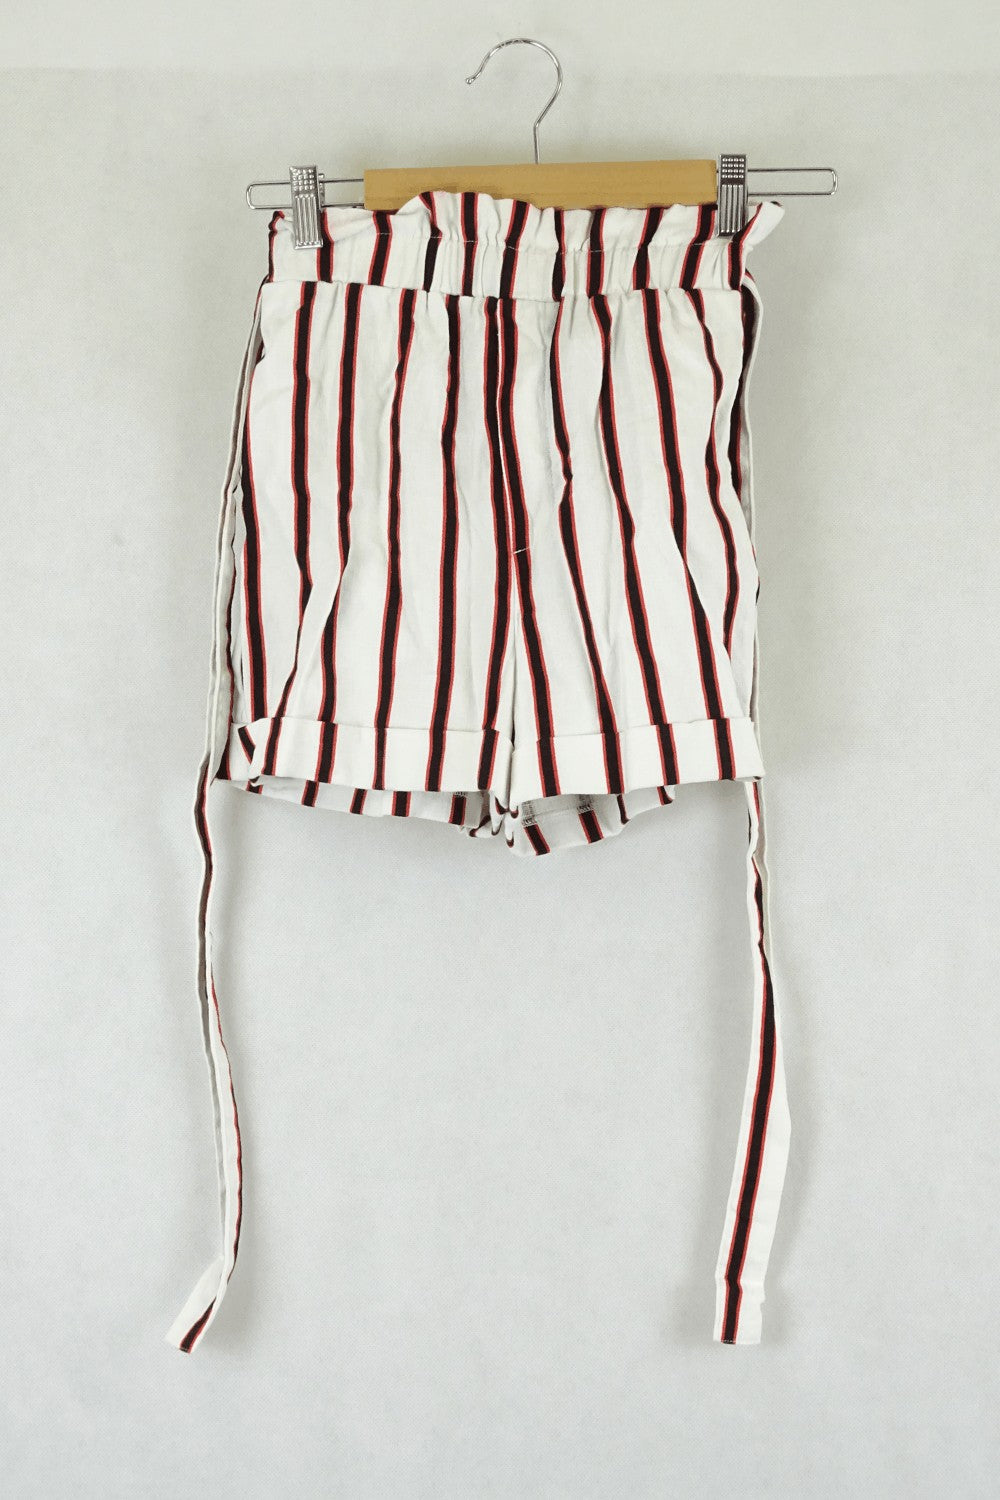 Bardot Striped Red,Black And White Shorts 6